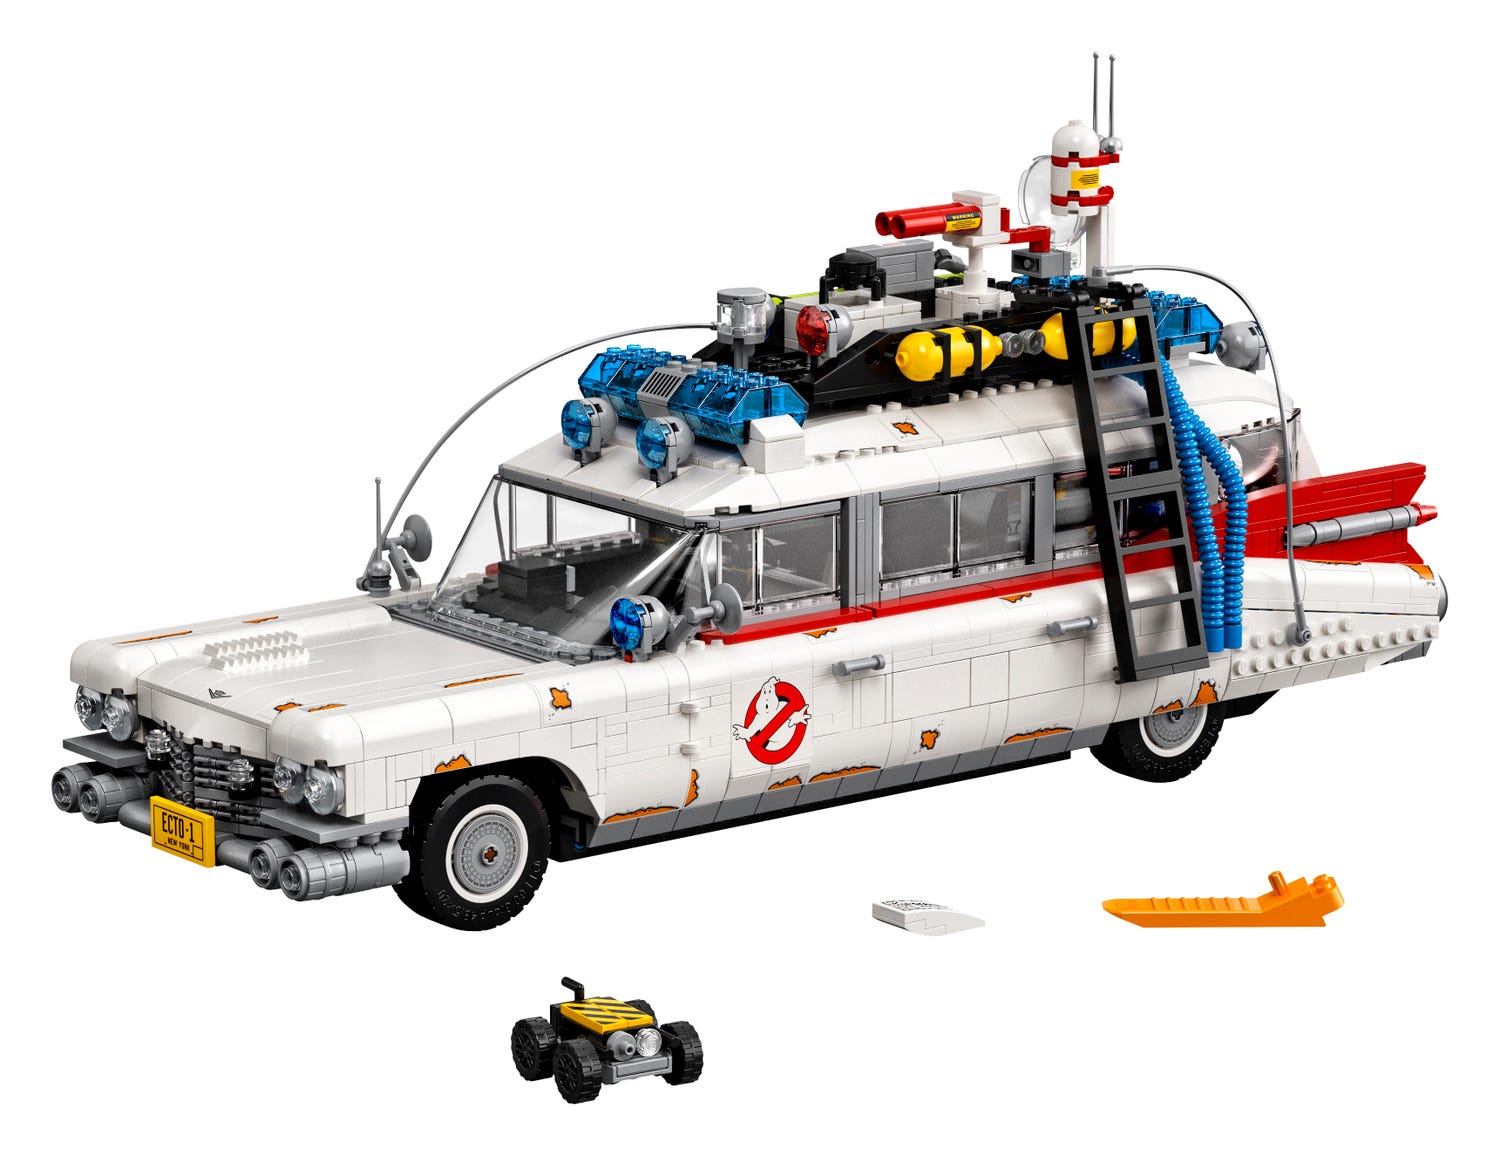 ghostbusters lego store